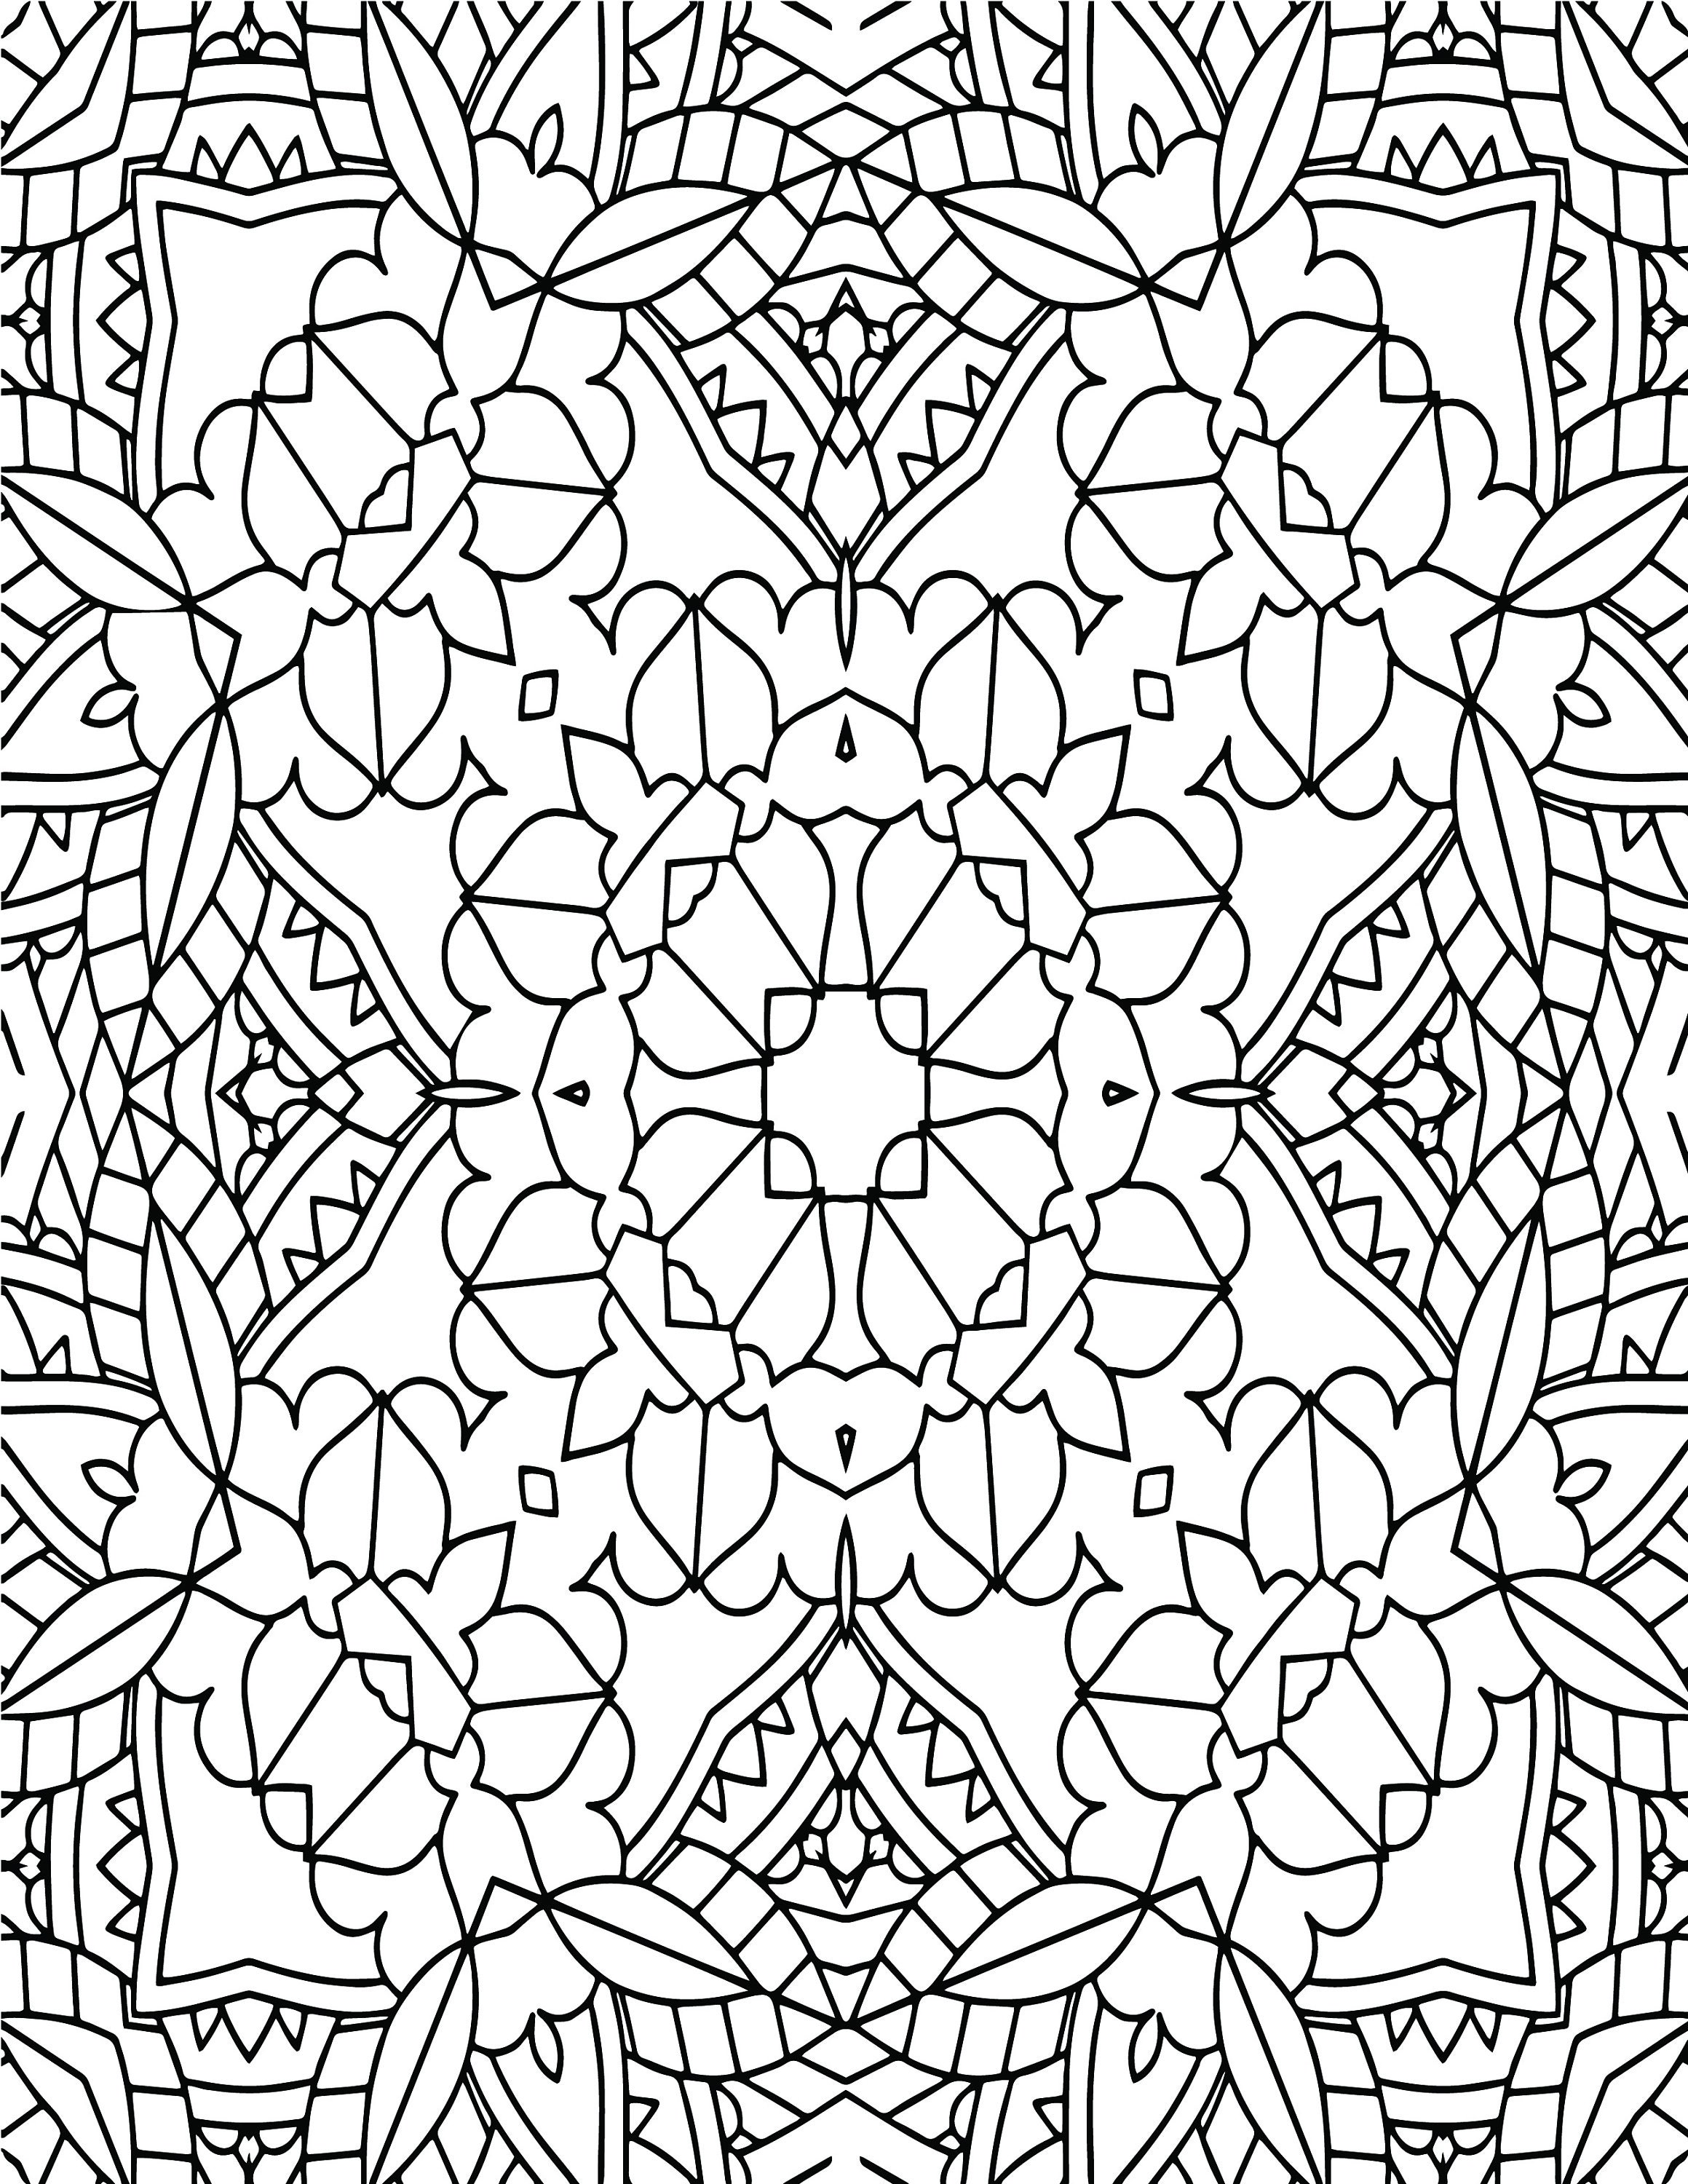 Mandela Print Out Coloring Sheet Page Beautiful And Fun Mandela
Coloring Pages For All Ages